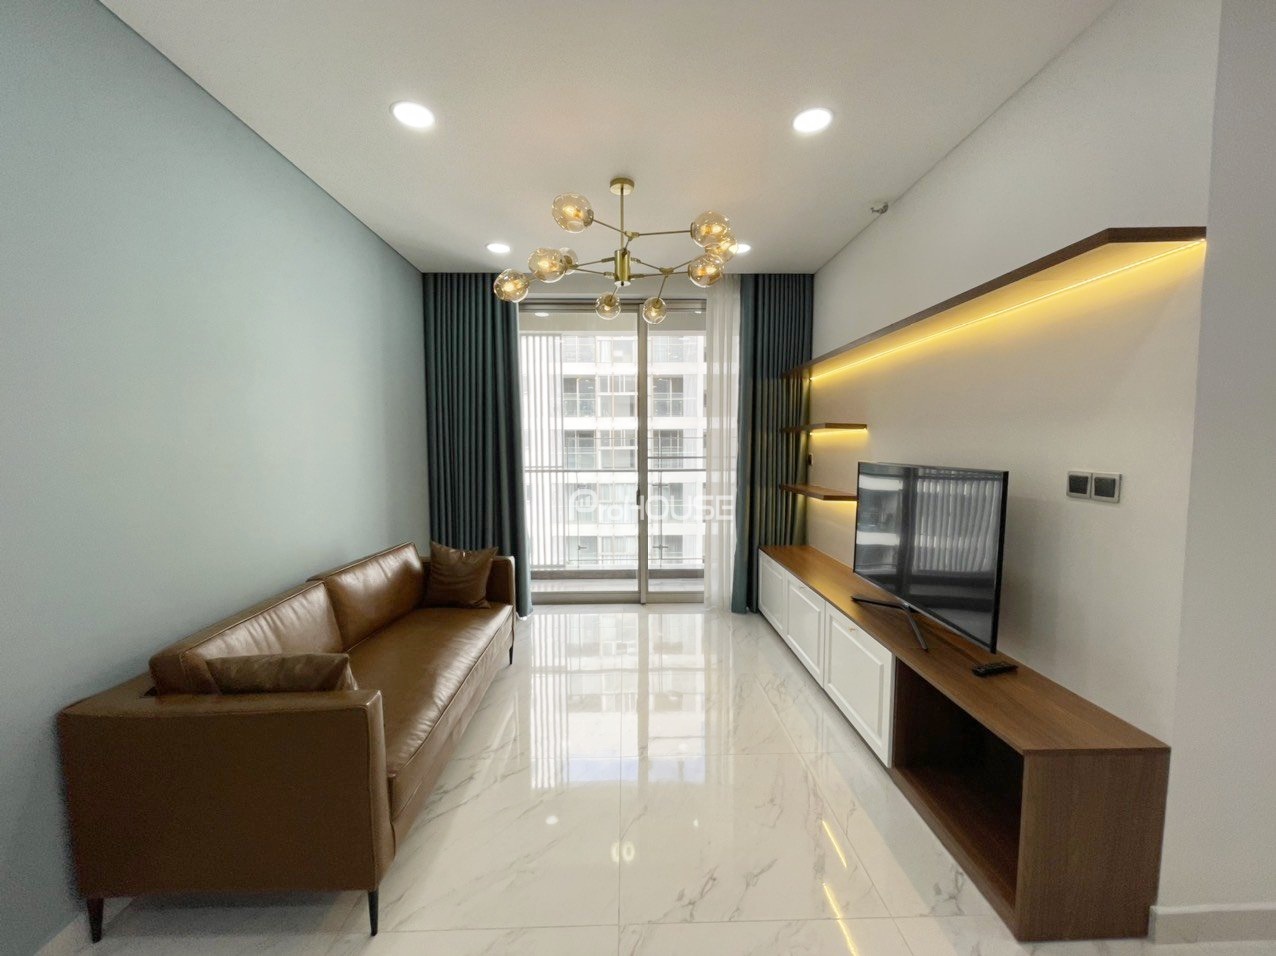 Luxurious and fully furnished Midtown apartment for rent with 2 bedrooms